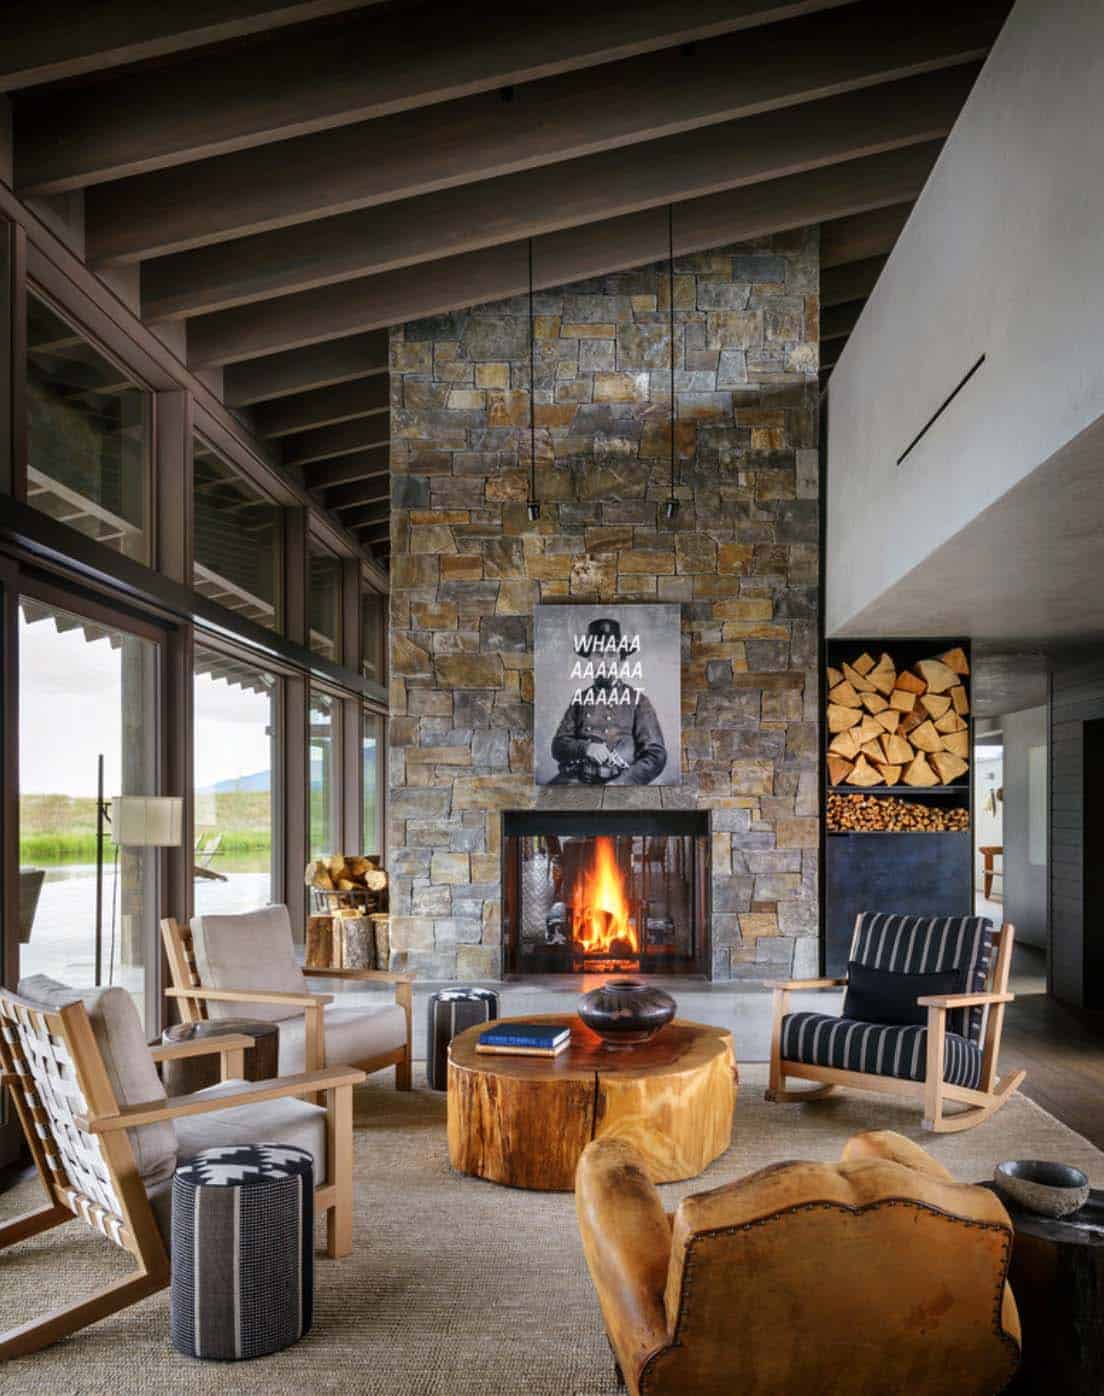 Montana ranch house embraces its striking river valley location